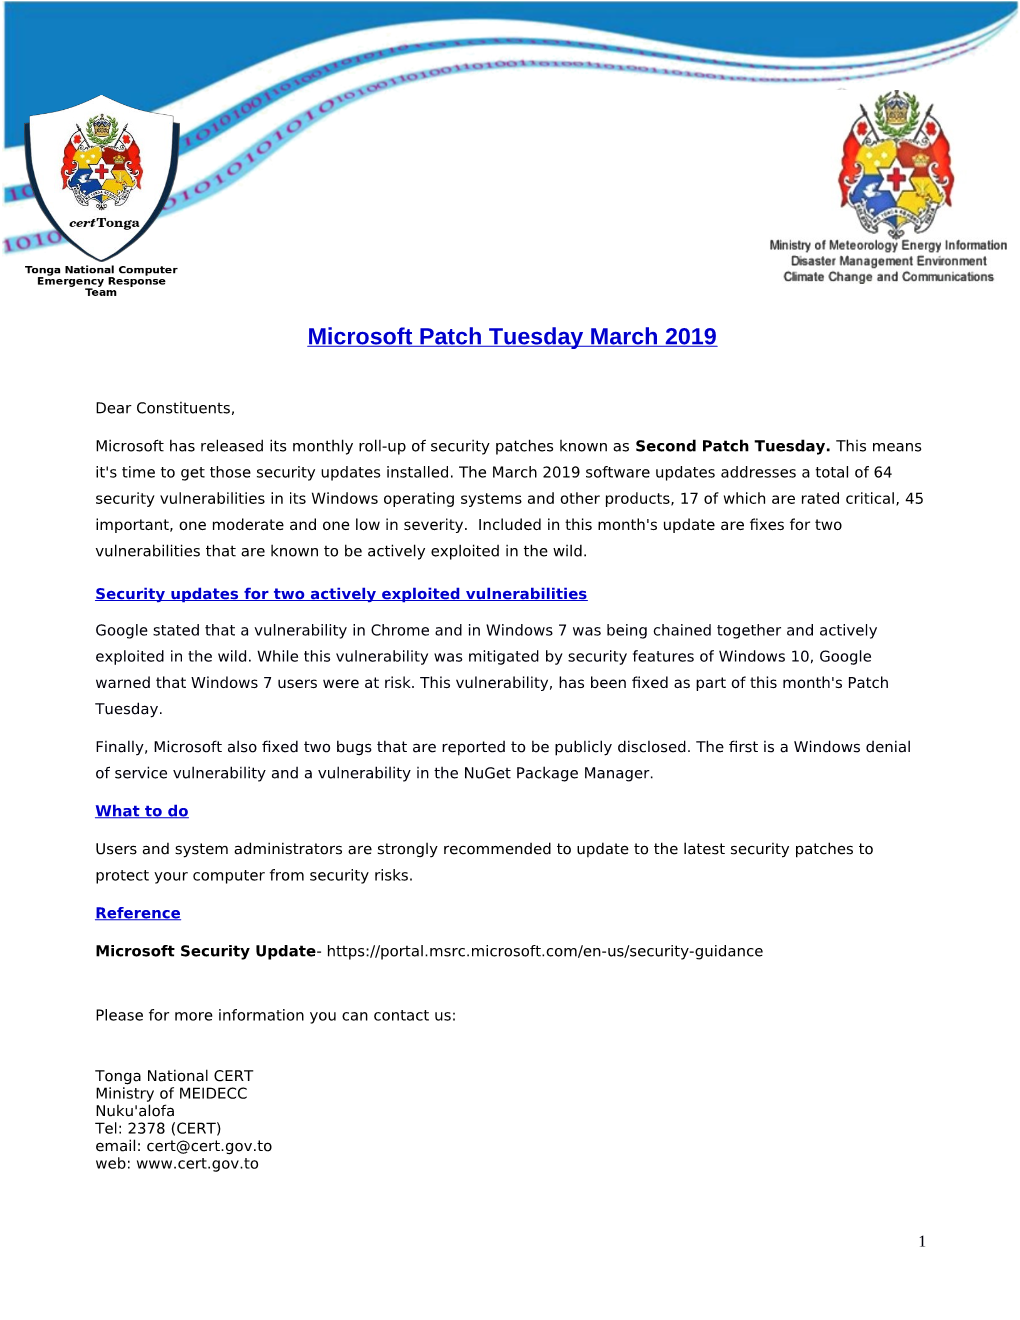 Microsoft Patch Tuesday March 2019